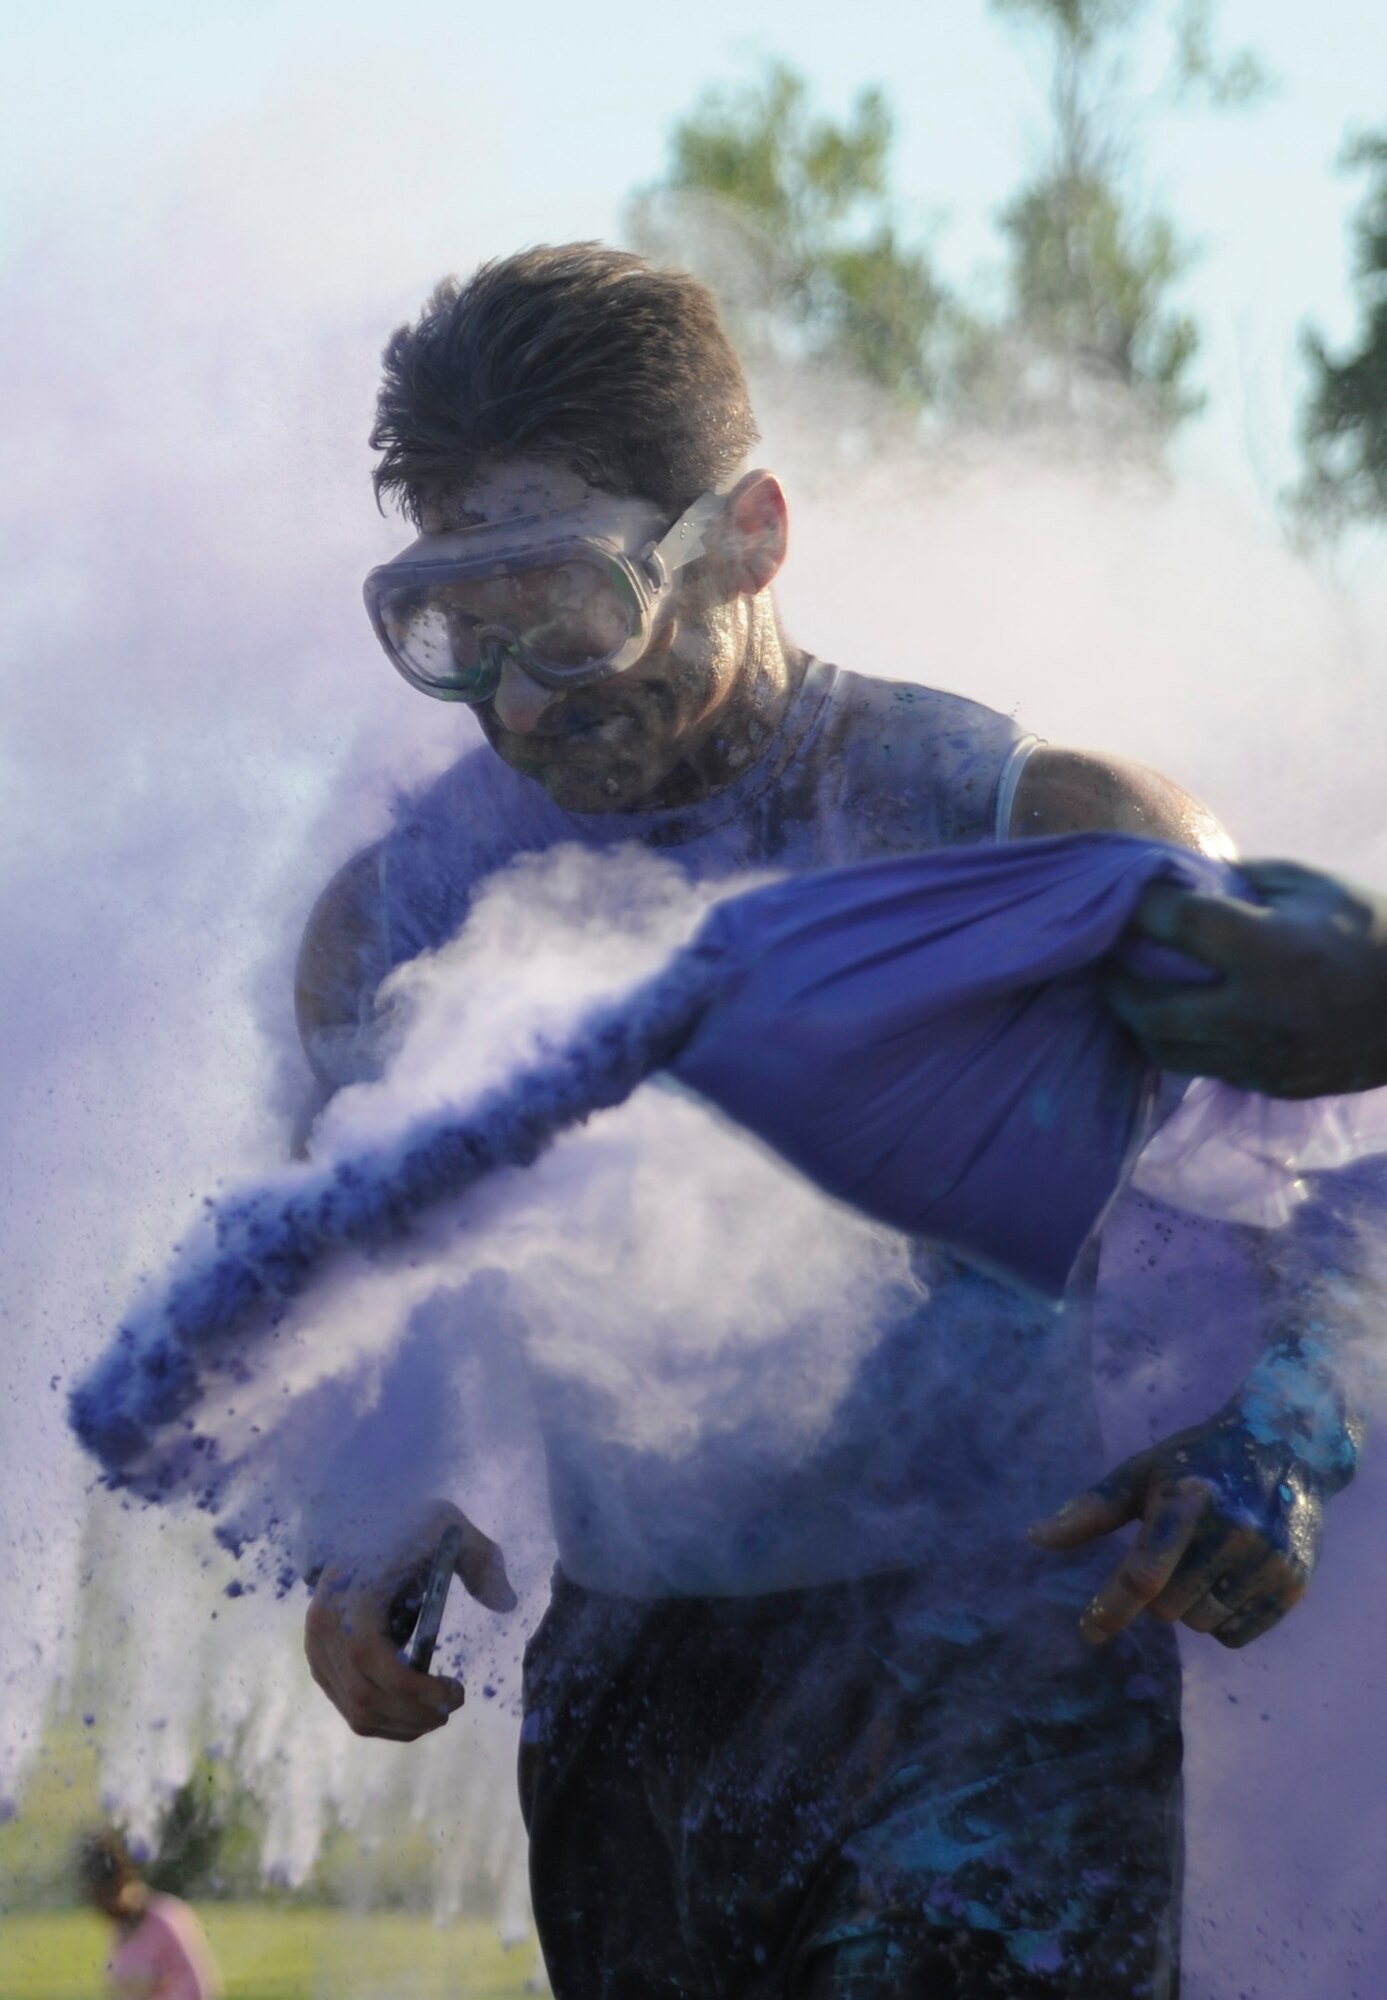 U.S. Air Force Lt. Col. Daniel Murray, a participant of the Lesbian, Gay, Bisexual and Transgender (LGBT) Pride Month Rainbow Run 5K, runs through a cloud of colored powder at Whiteman Air Force Base, Mo., June 24, 2016. The run was one of the LGBT Pride Month events celebrating the great diversity of the American people. (U.S. Air Force photo by Senior Airman Danielle Quilla)